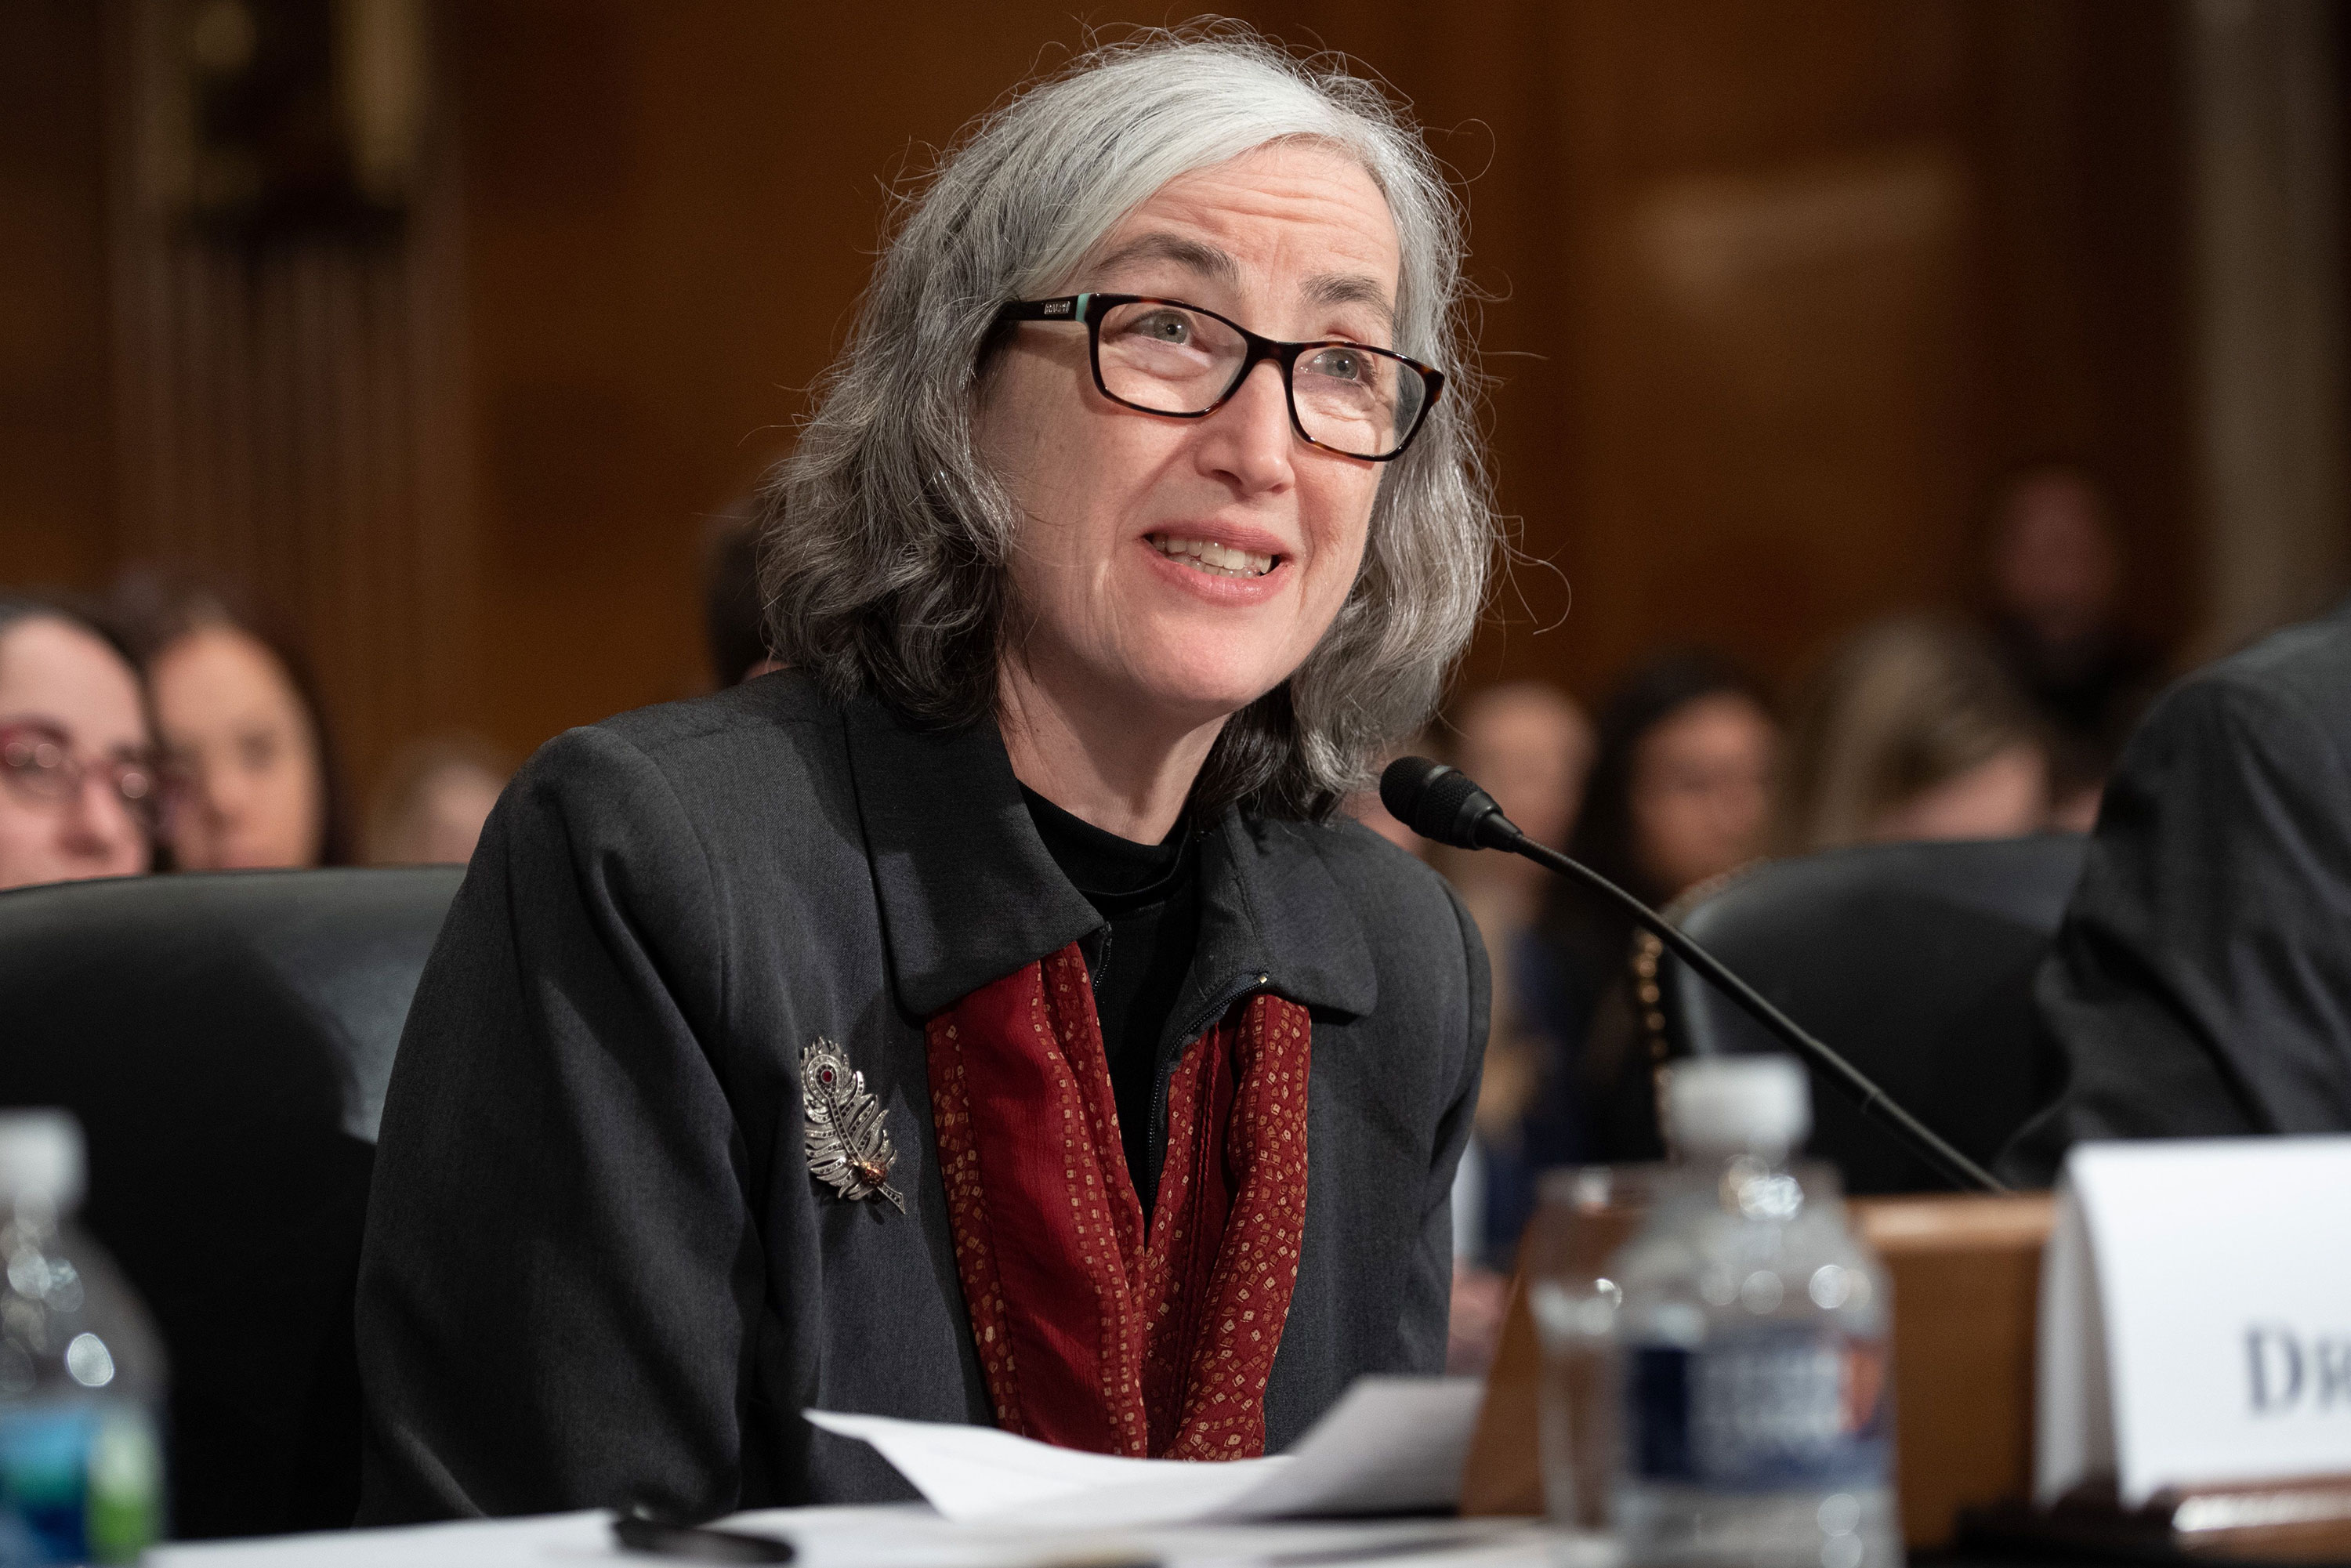 Dr. Anne Schuchat, speaks during a Senate Committee on Health, Education, Labor, and Pensions hearing on March 3.